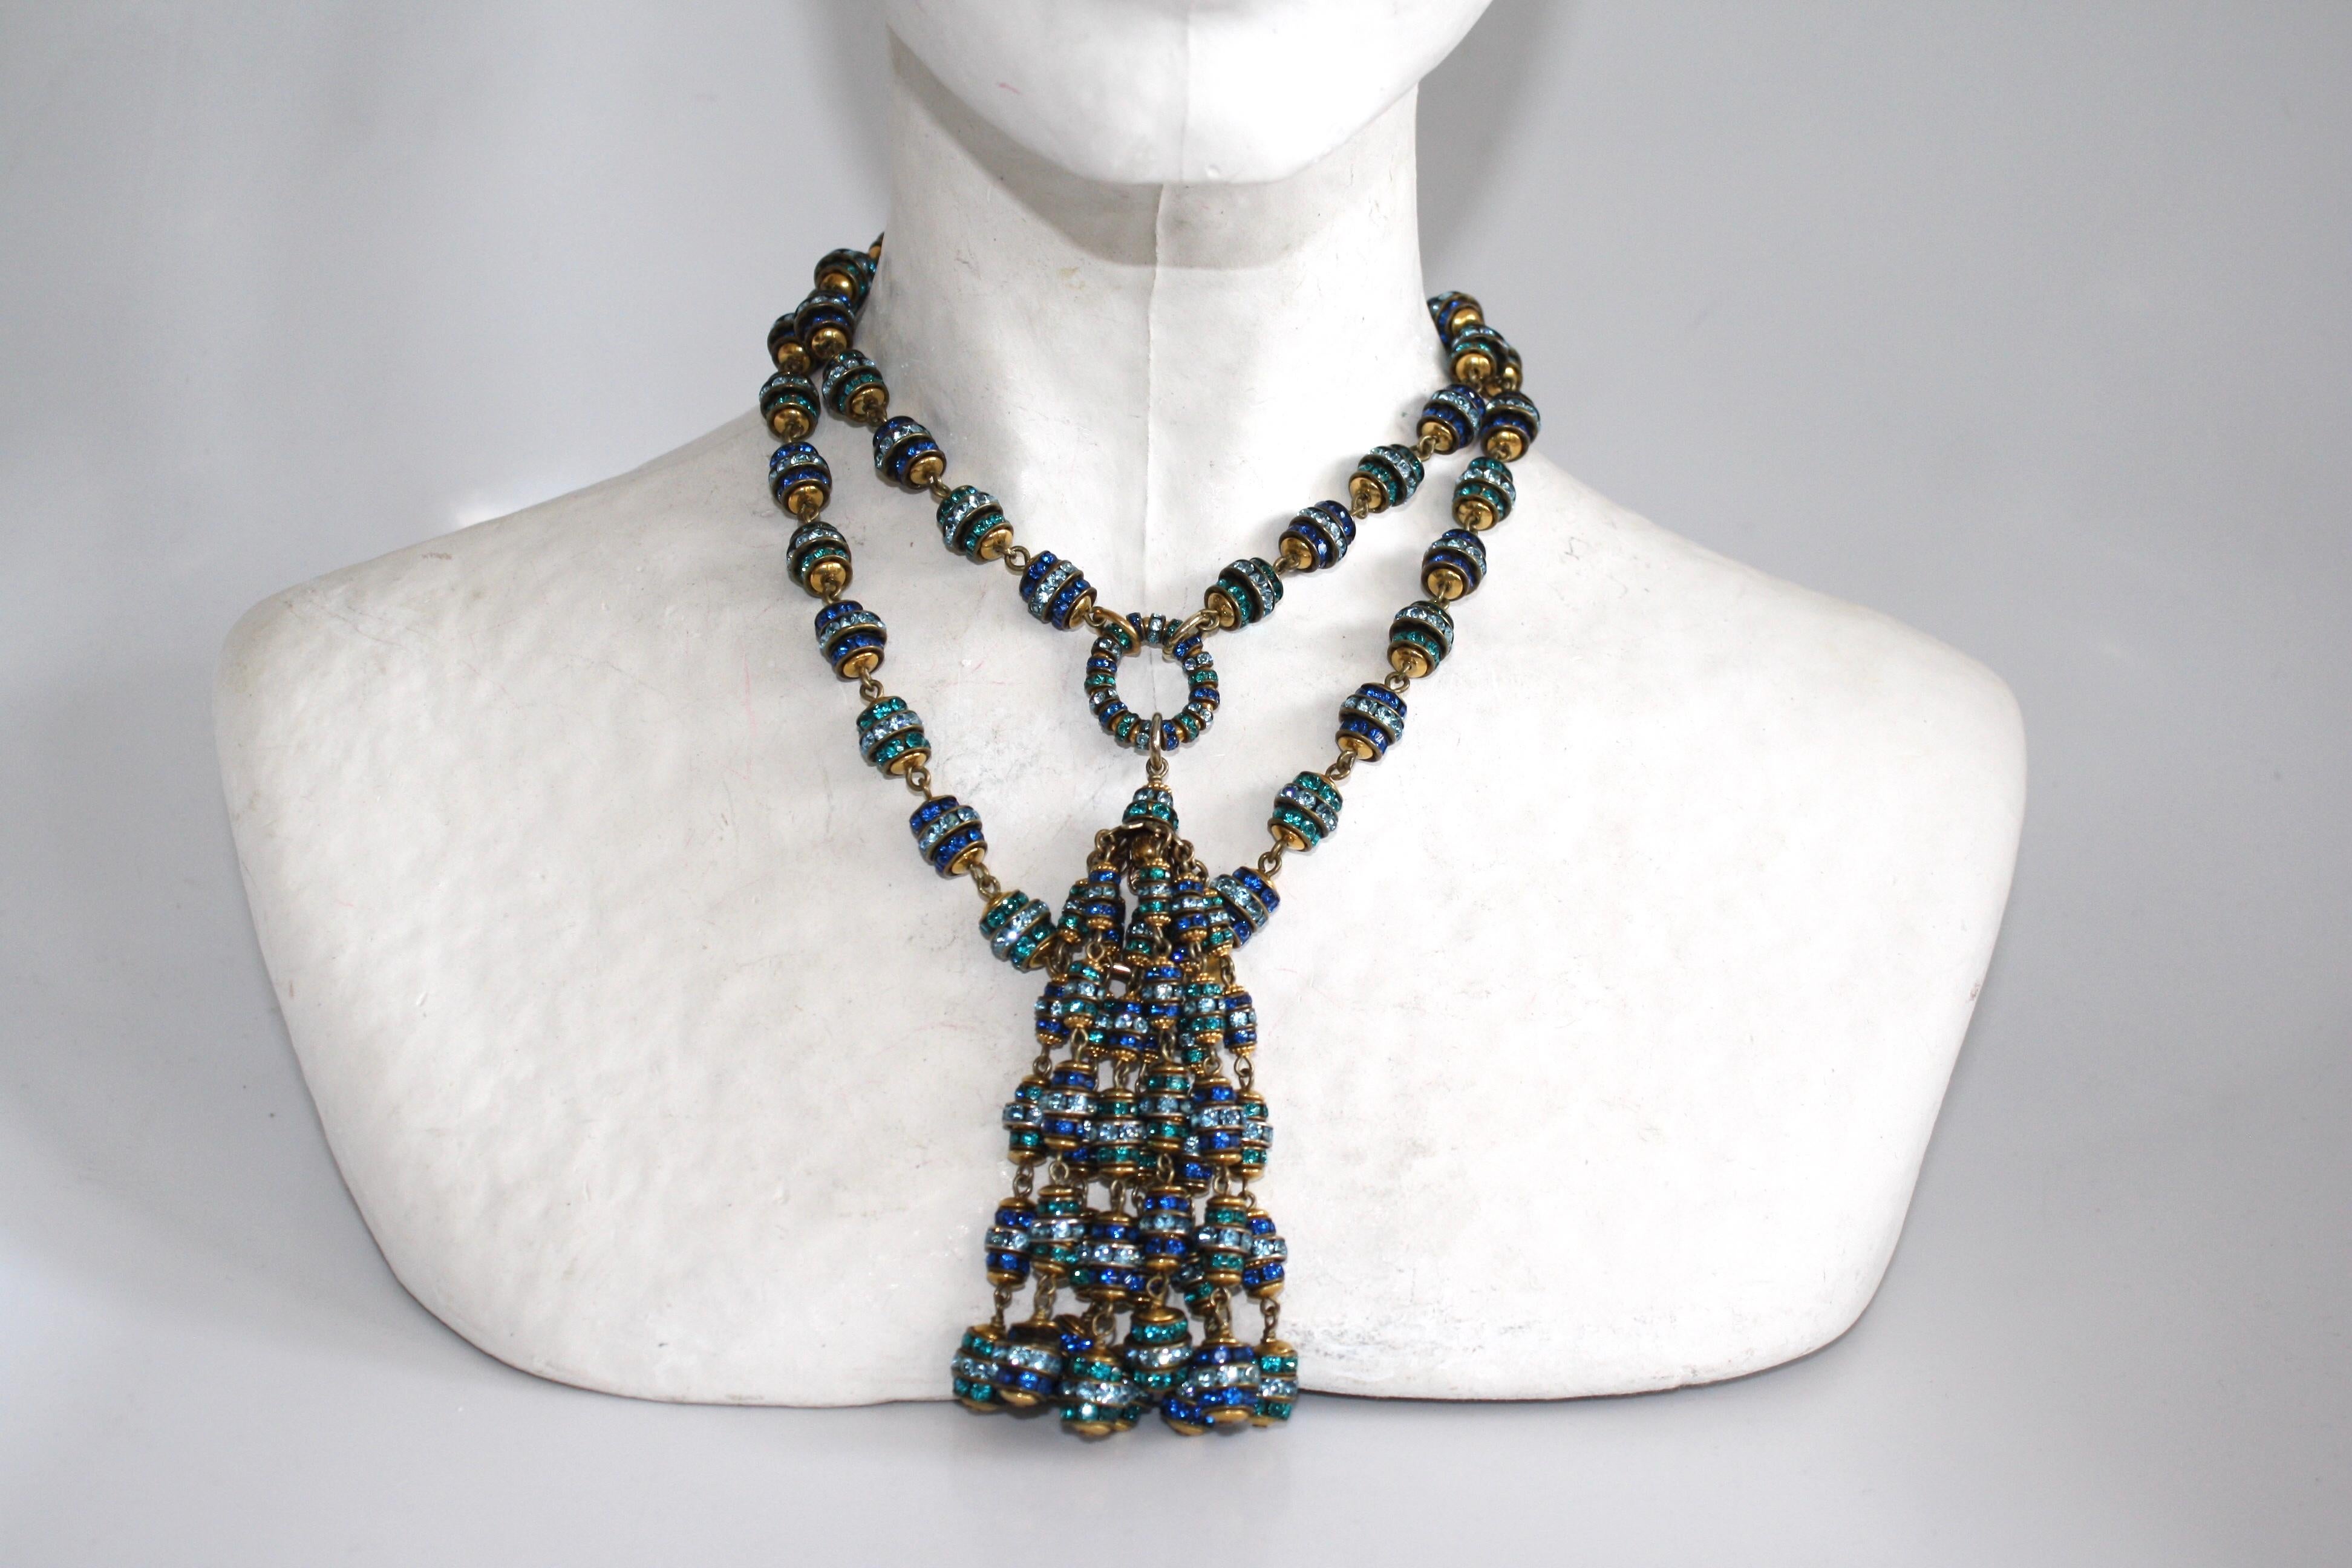 Long tassel necklace with crystal beads in shades of blue from Francoise Montague. 